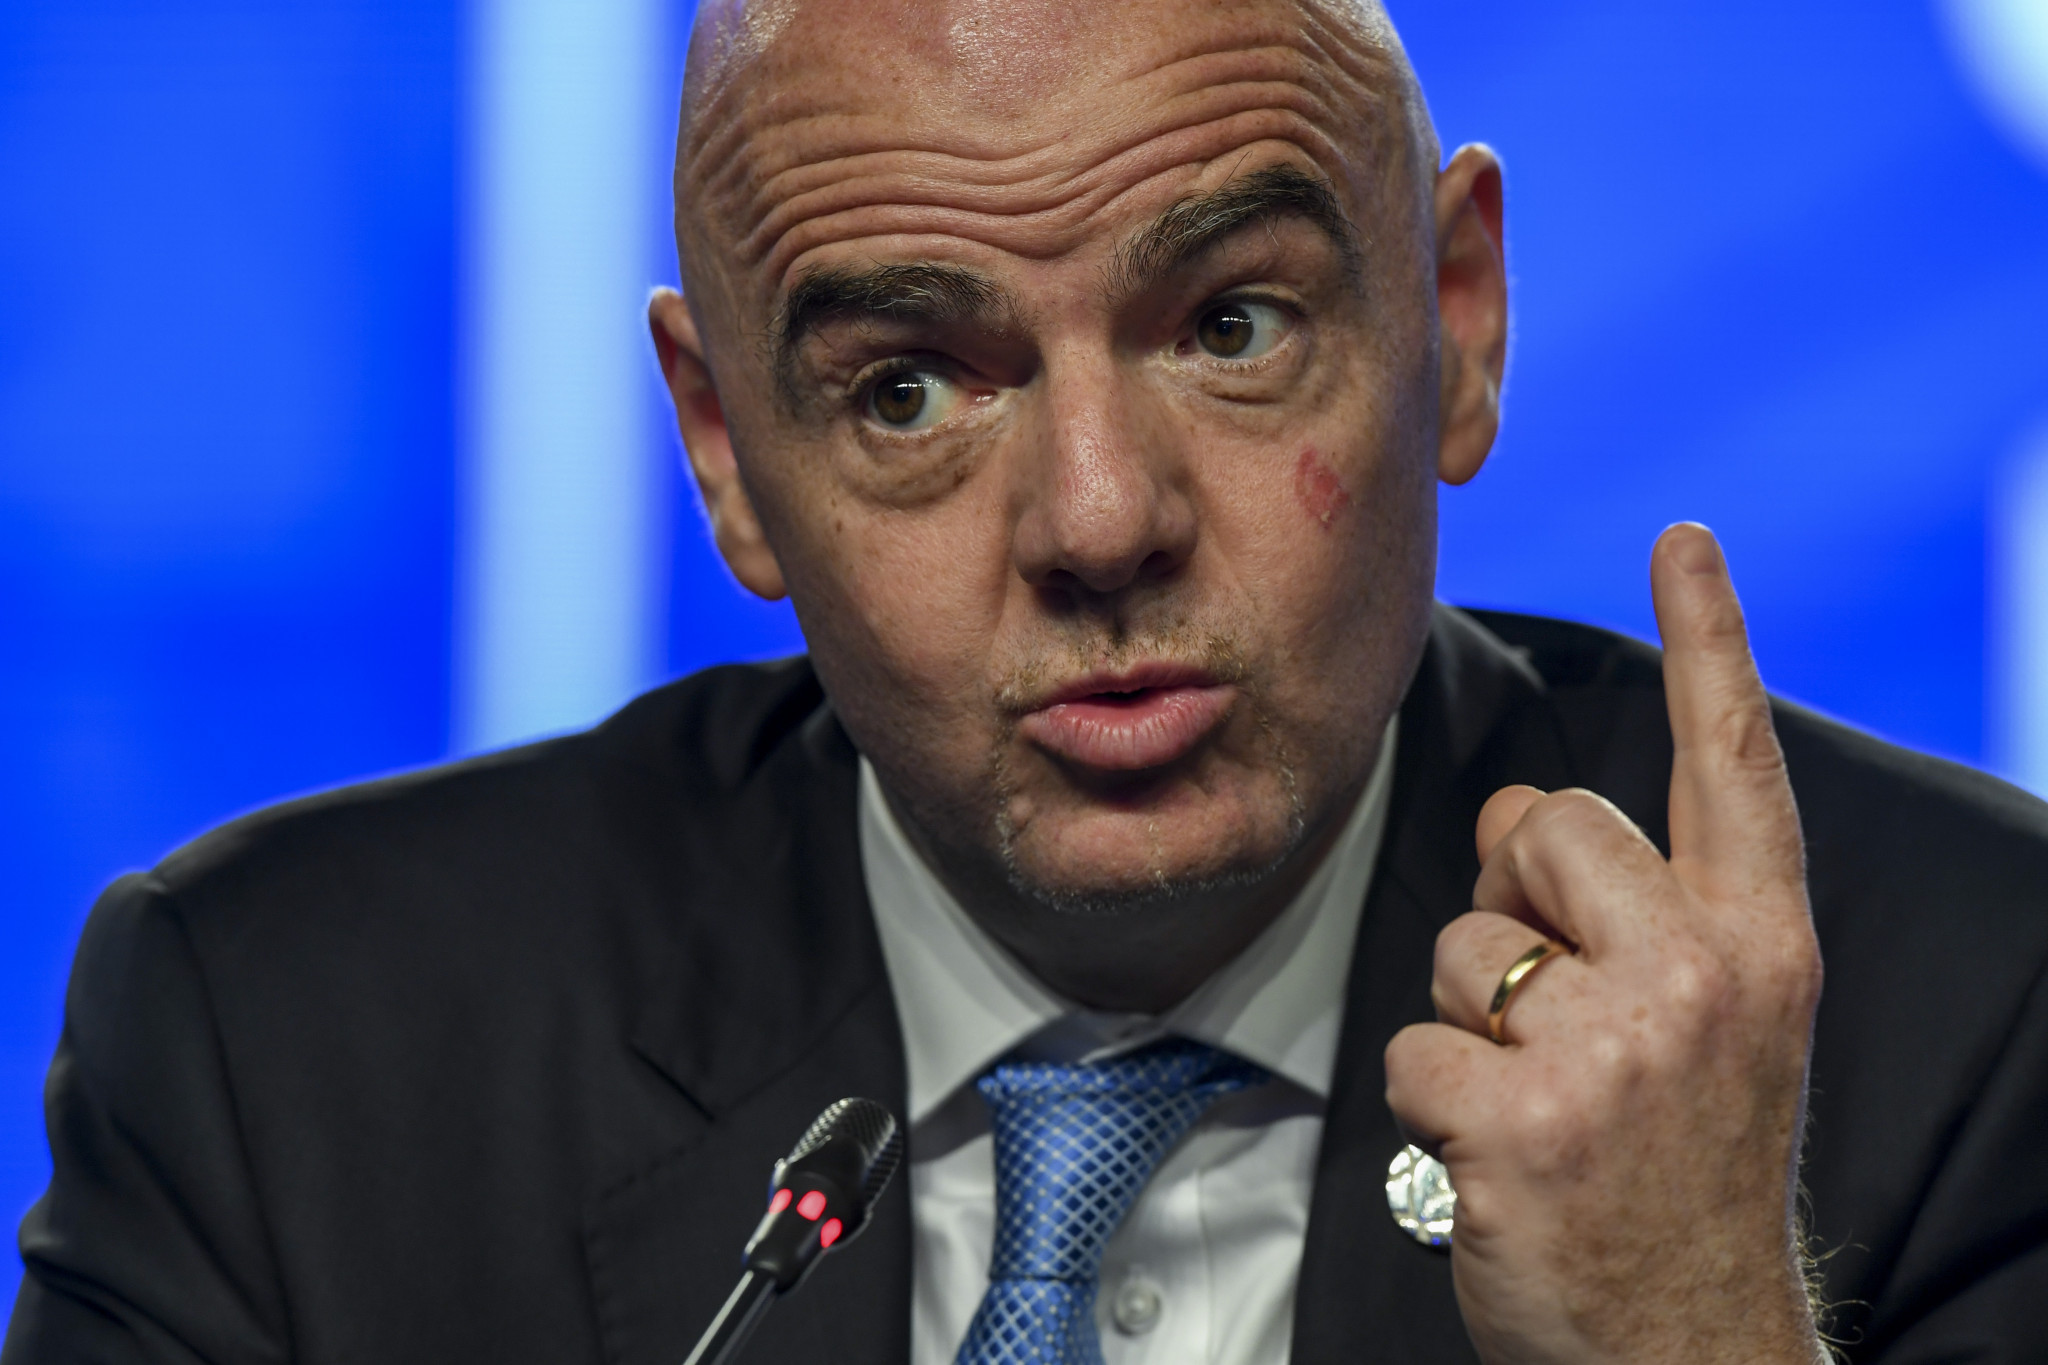 FIFA President Gianni Infantino warned that the Qatar 2022 expansion plans will only be considered with the support of the host nation Qatar, who many fear would be unable to cope with the extra countries competing ©Getty Images